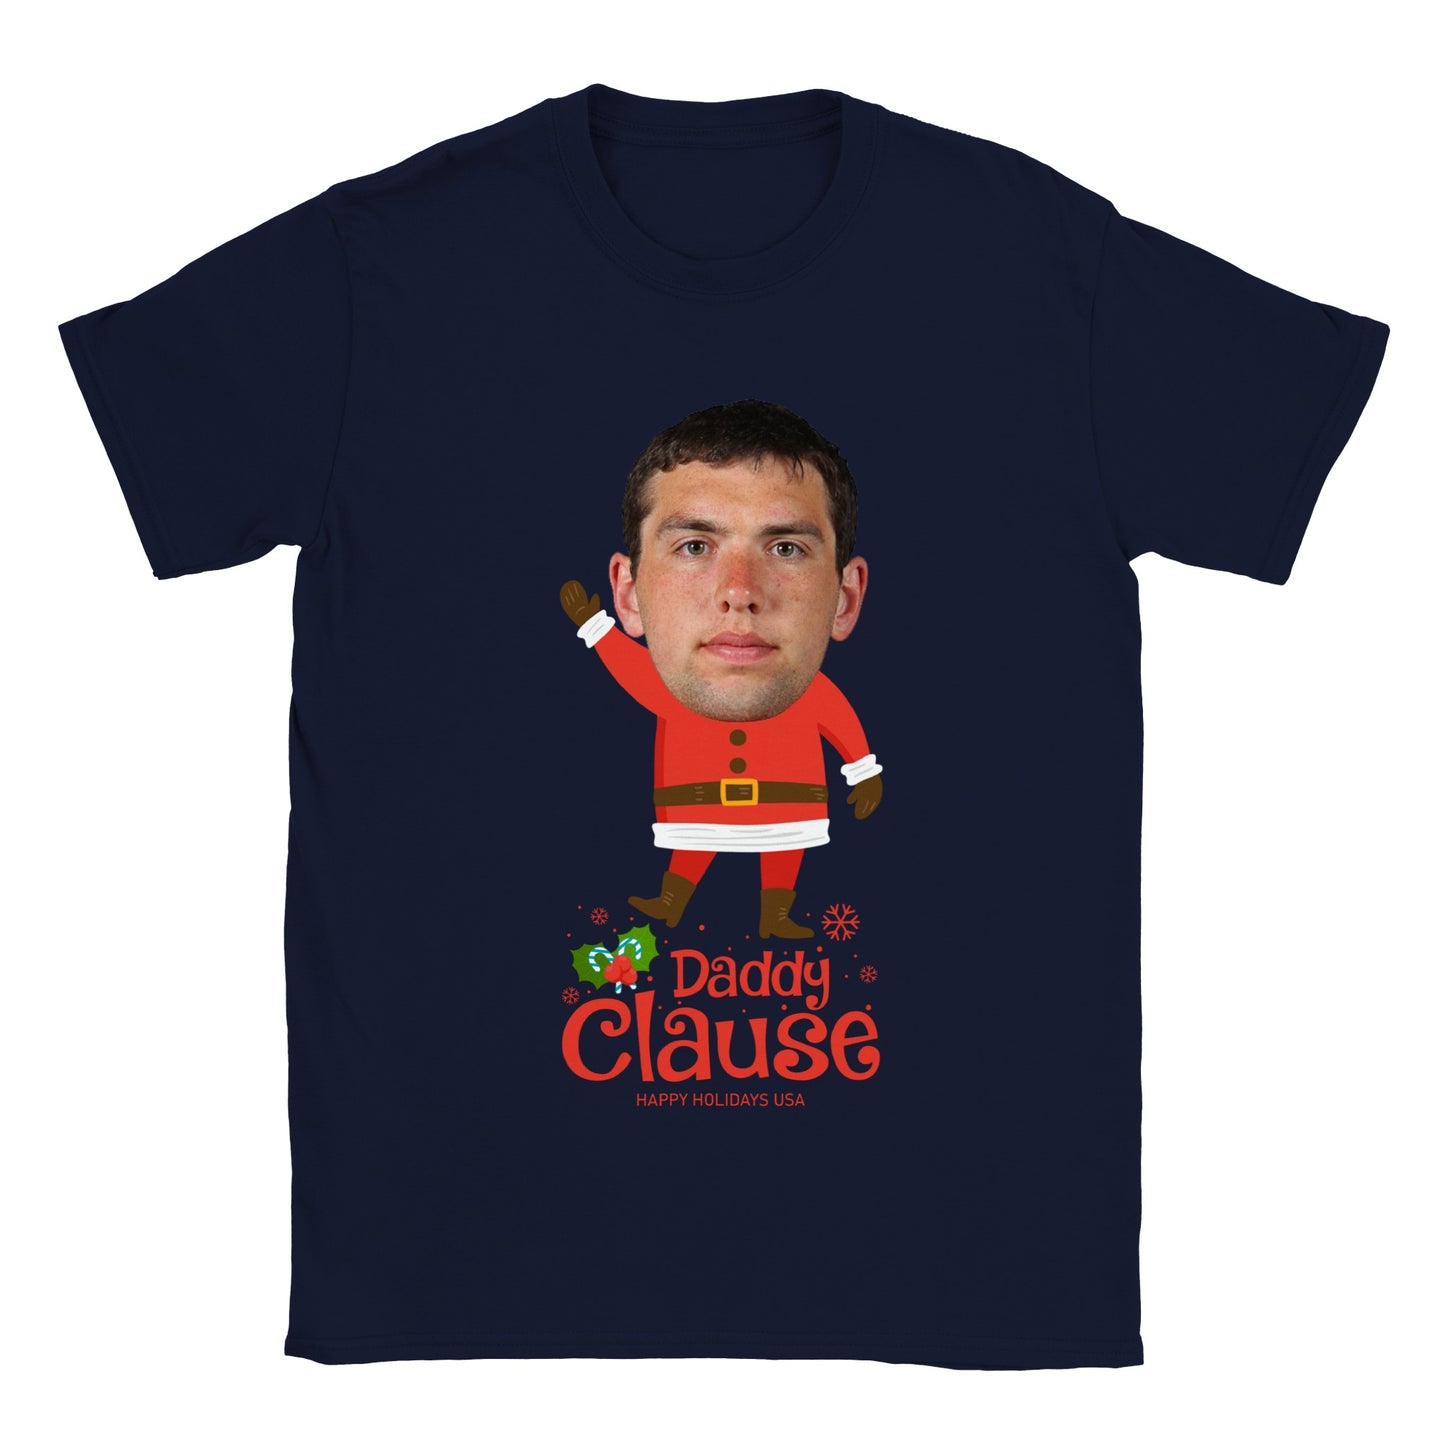 Daddy Clause - Christmas Tee